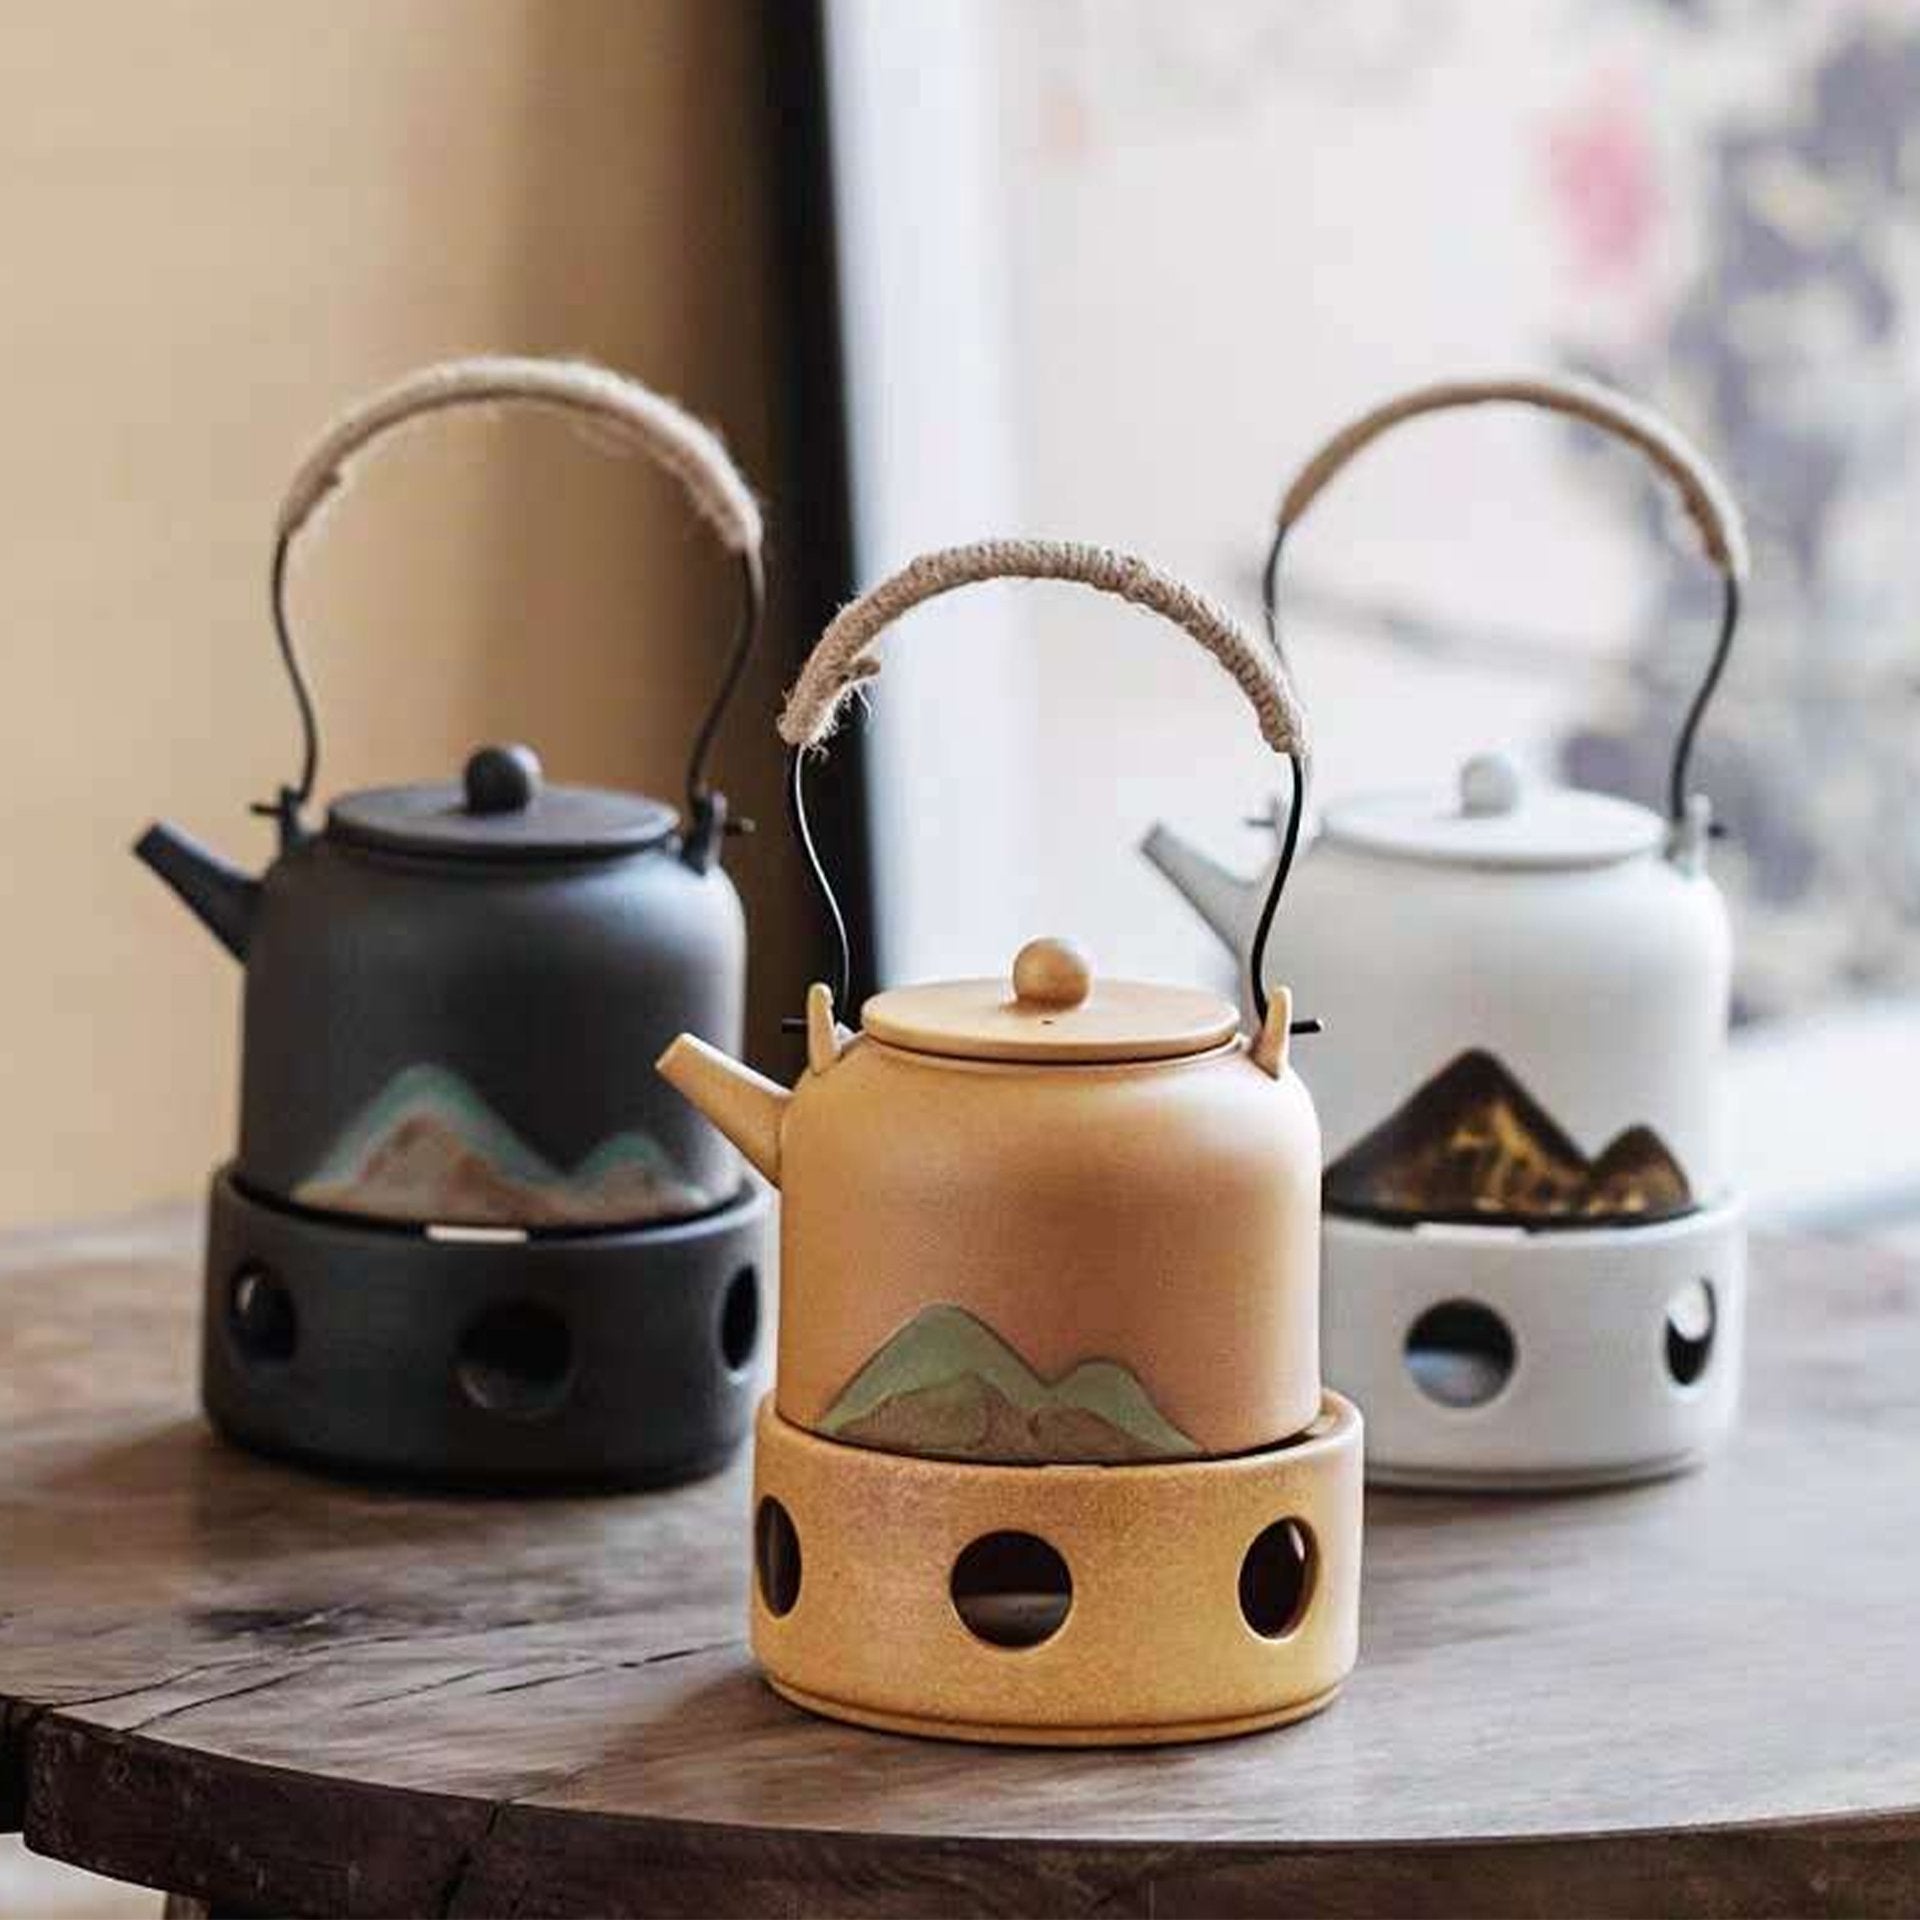 Three ceramic kettles on stoves in black, beige, and white on a wooden surface